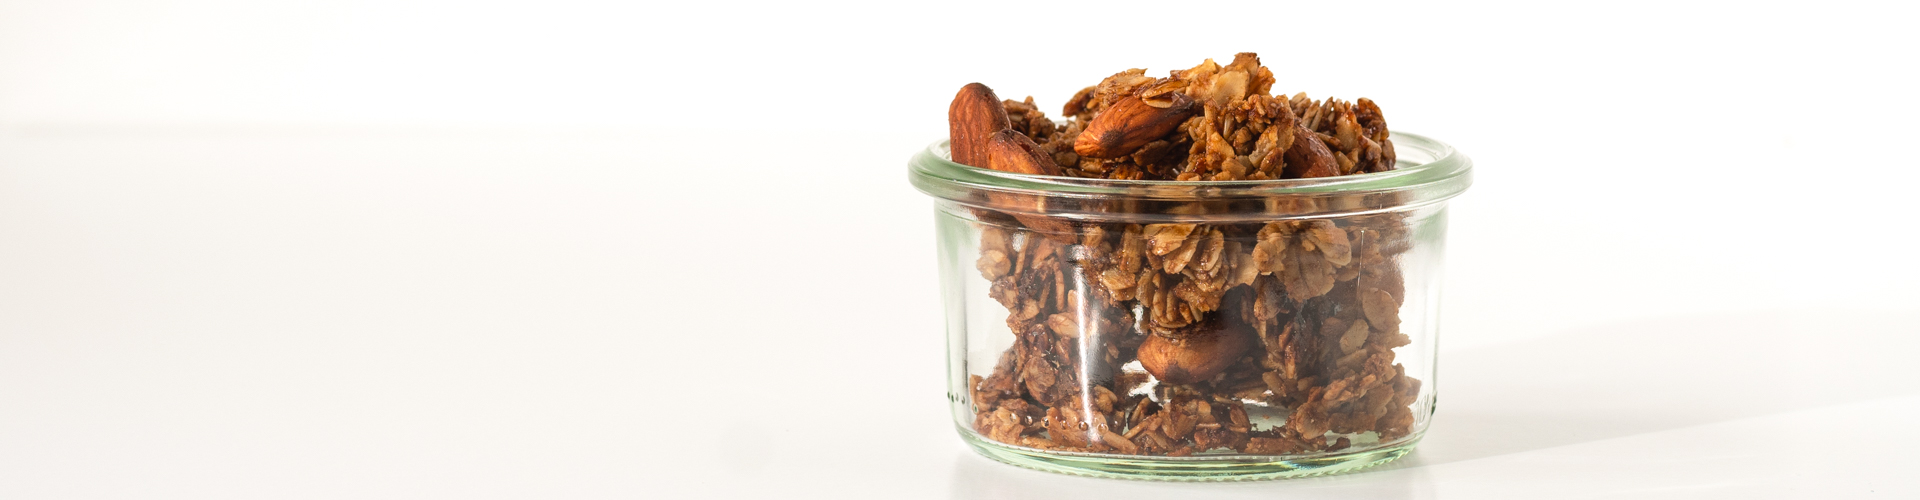 How to make chunky granola with less sugar and oil with Sunsweet prune juice concentrate